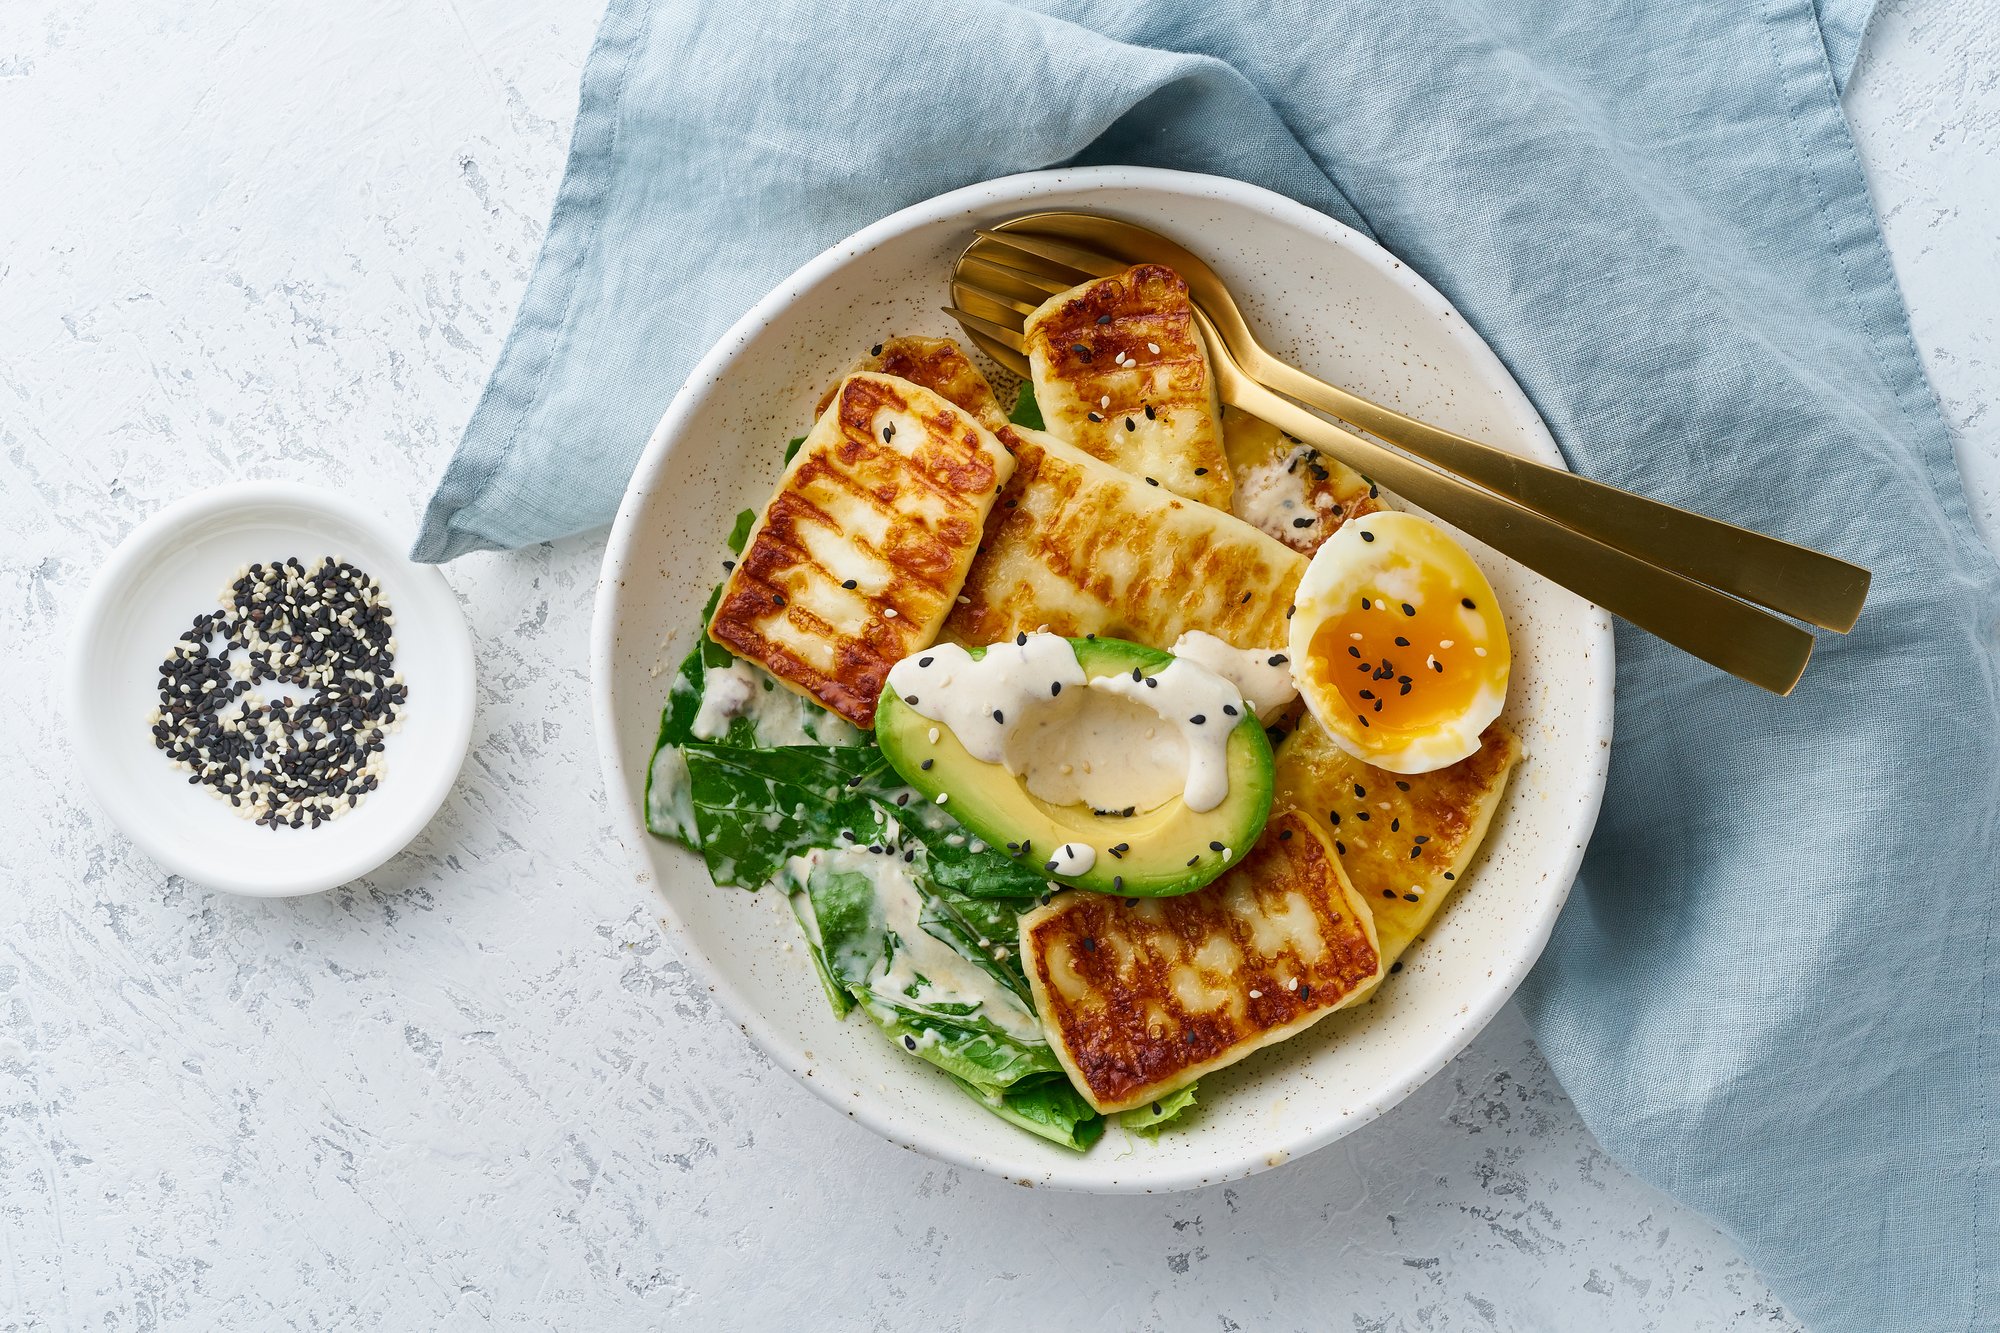 soft boiled eggs with grilled haloumi, avocado and lettuce